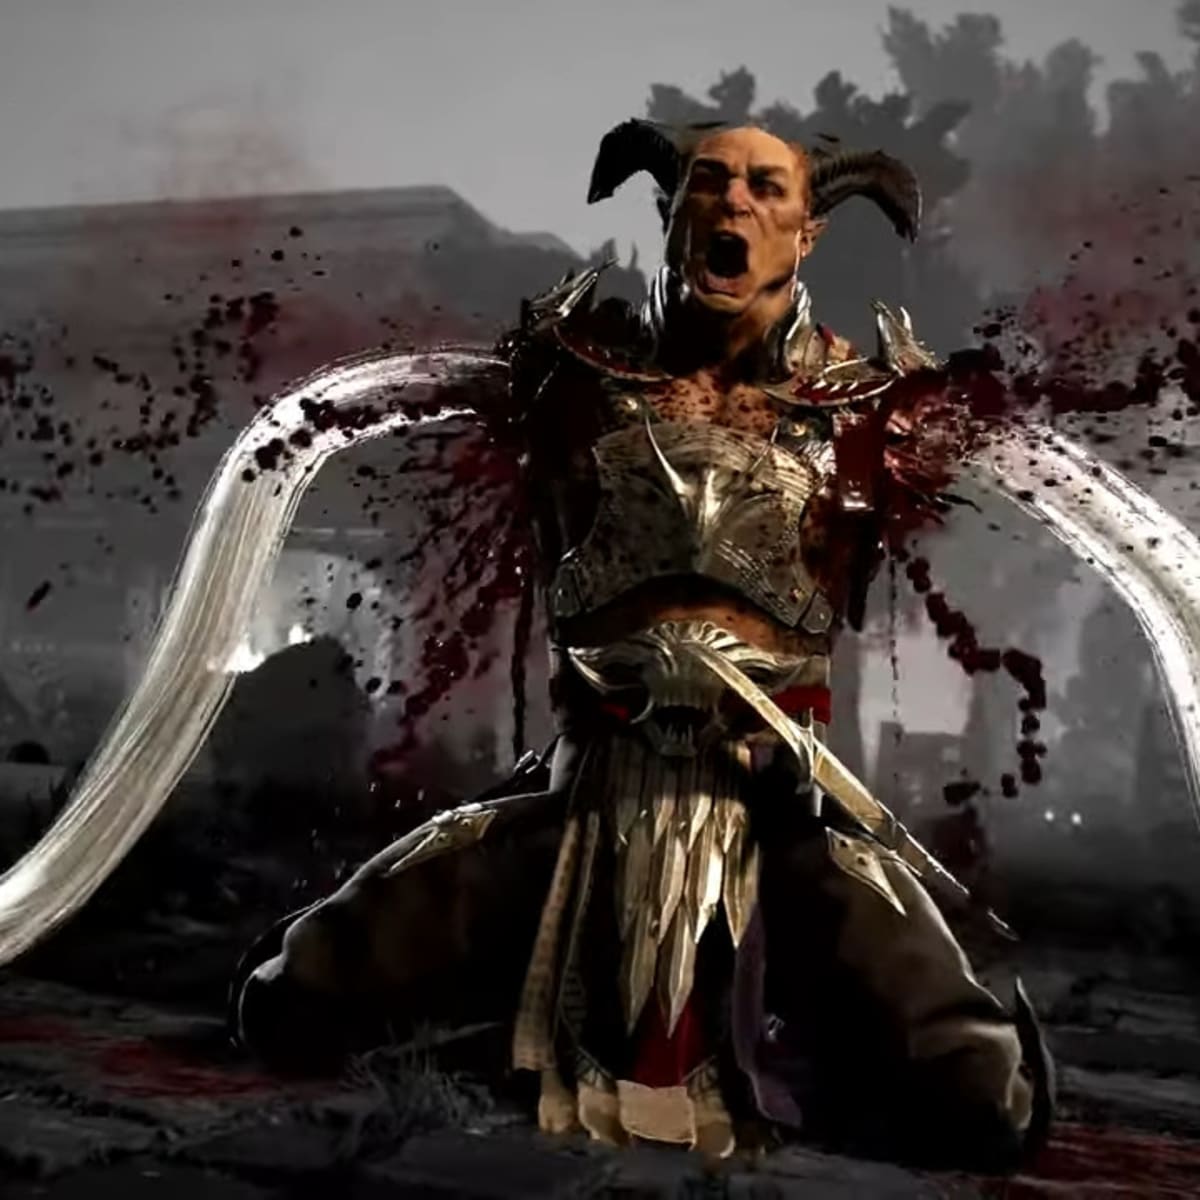 Absolutely Brutal Mortal Kombat Fatalities You Never Knew About